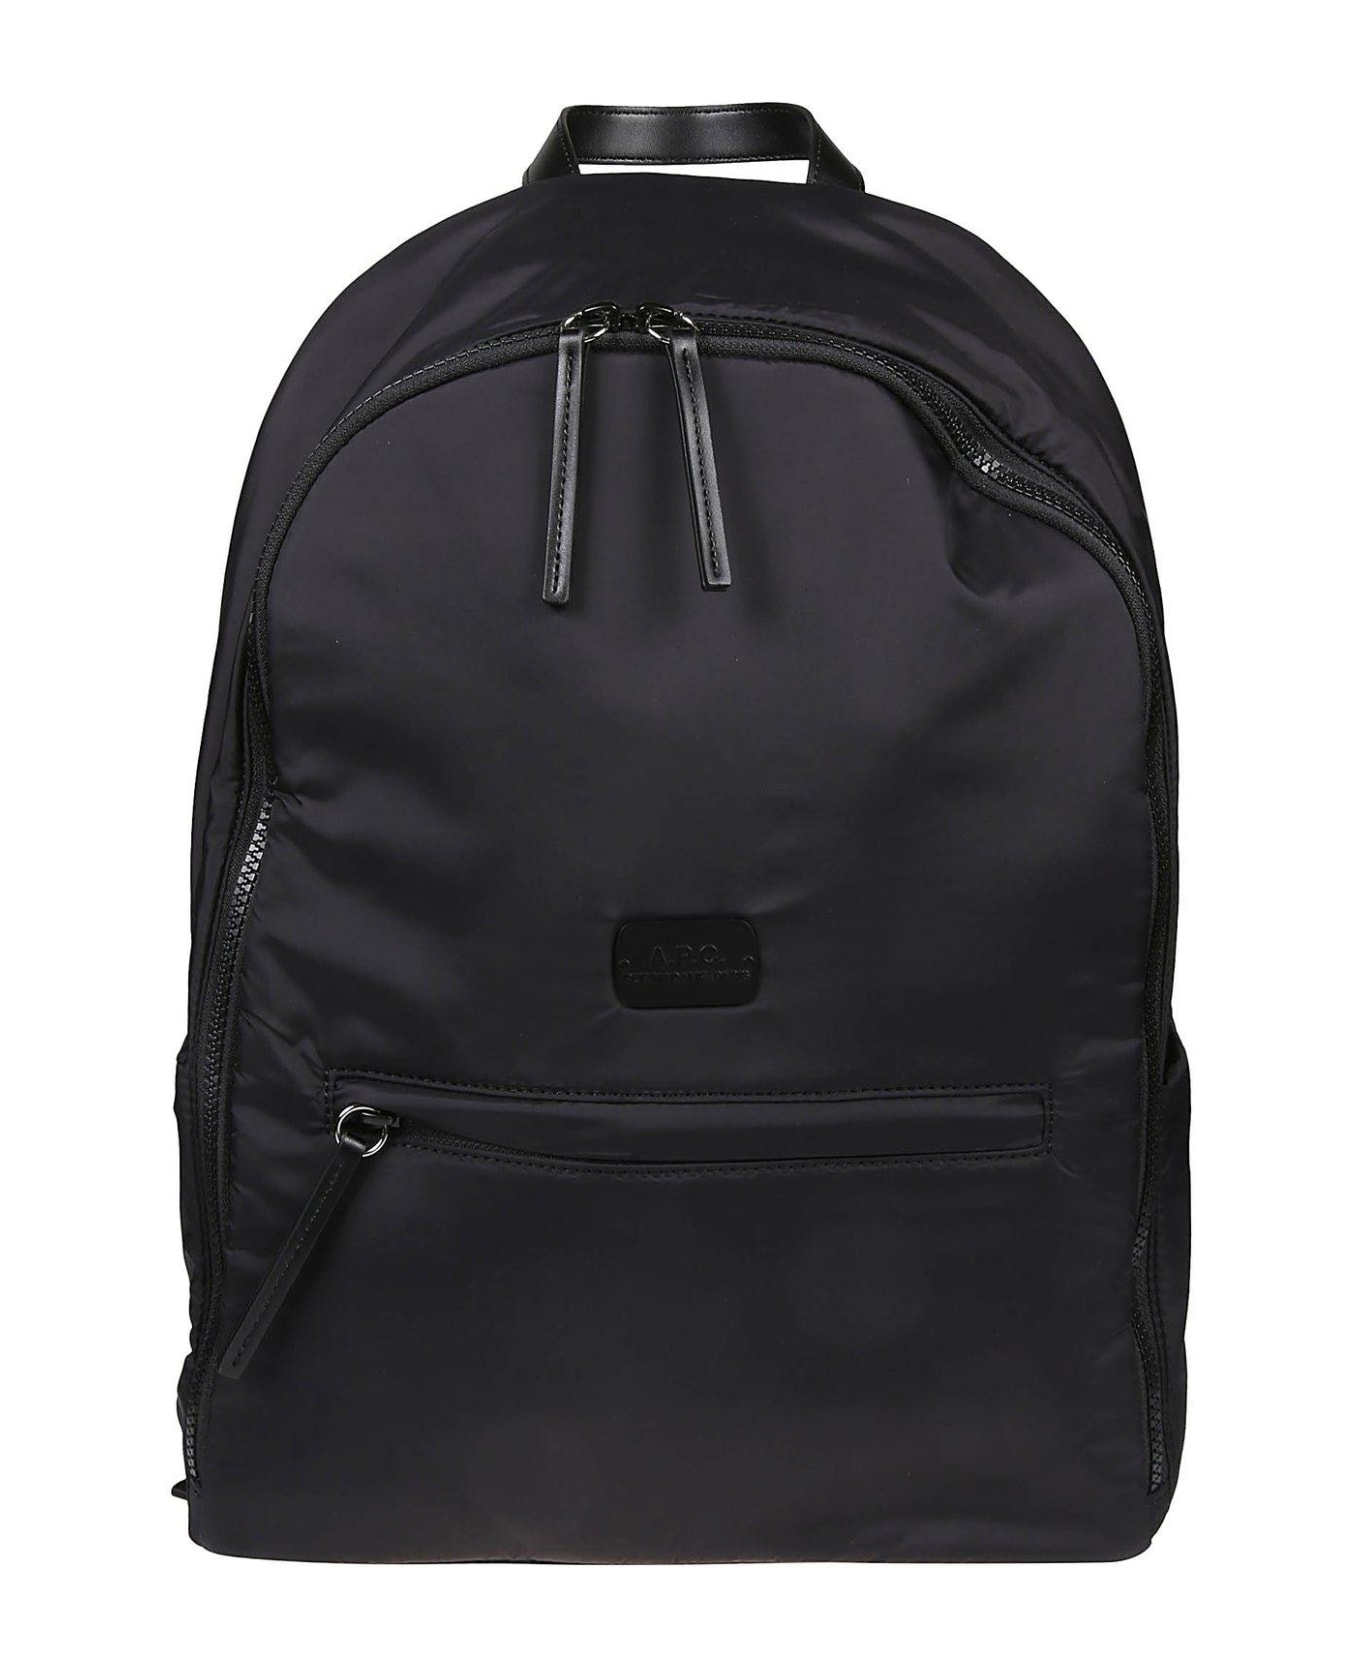 A.P.C. Logo Patch Zip-up Backpack - Lzz Noir バックパック